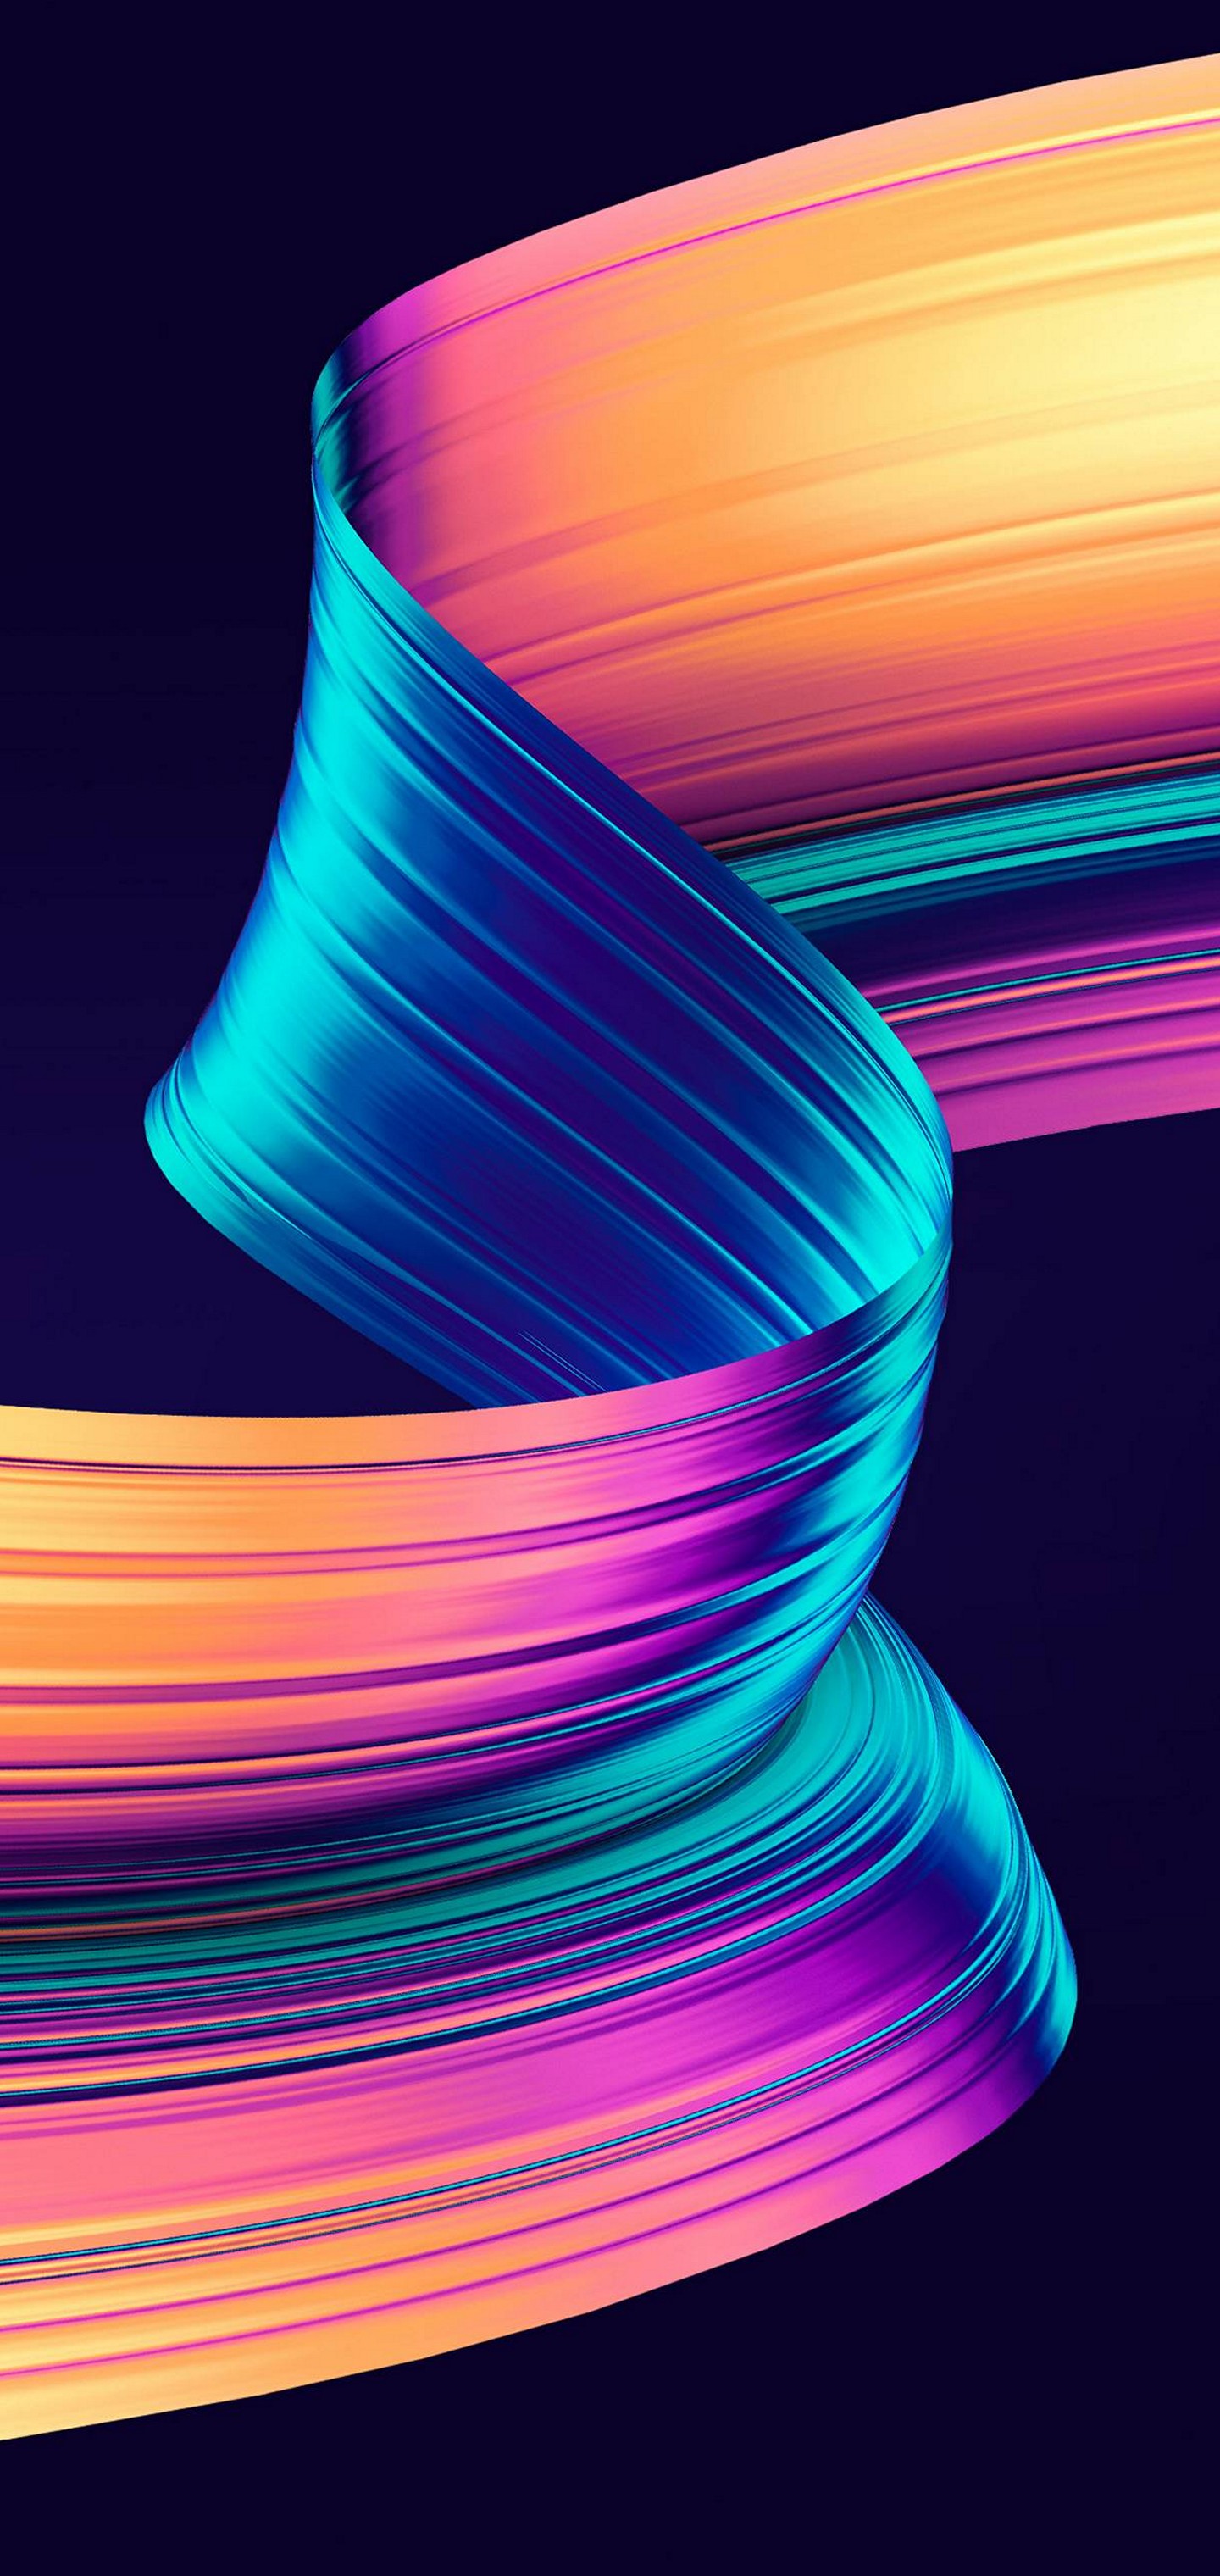 Girly 3d Layer Abstract Wallpaper